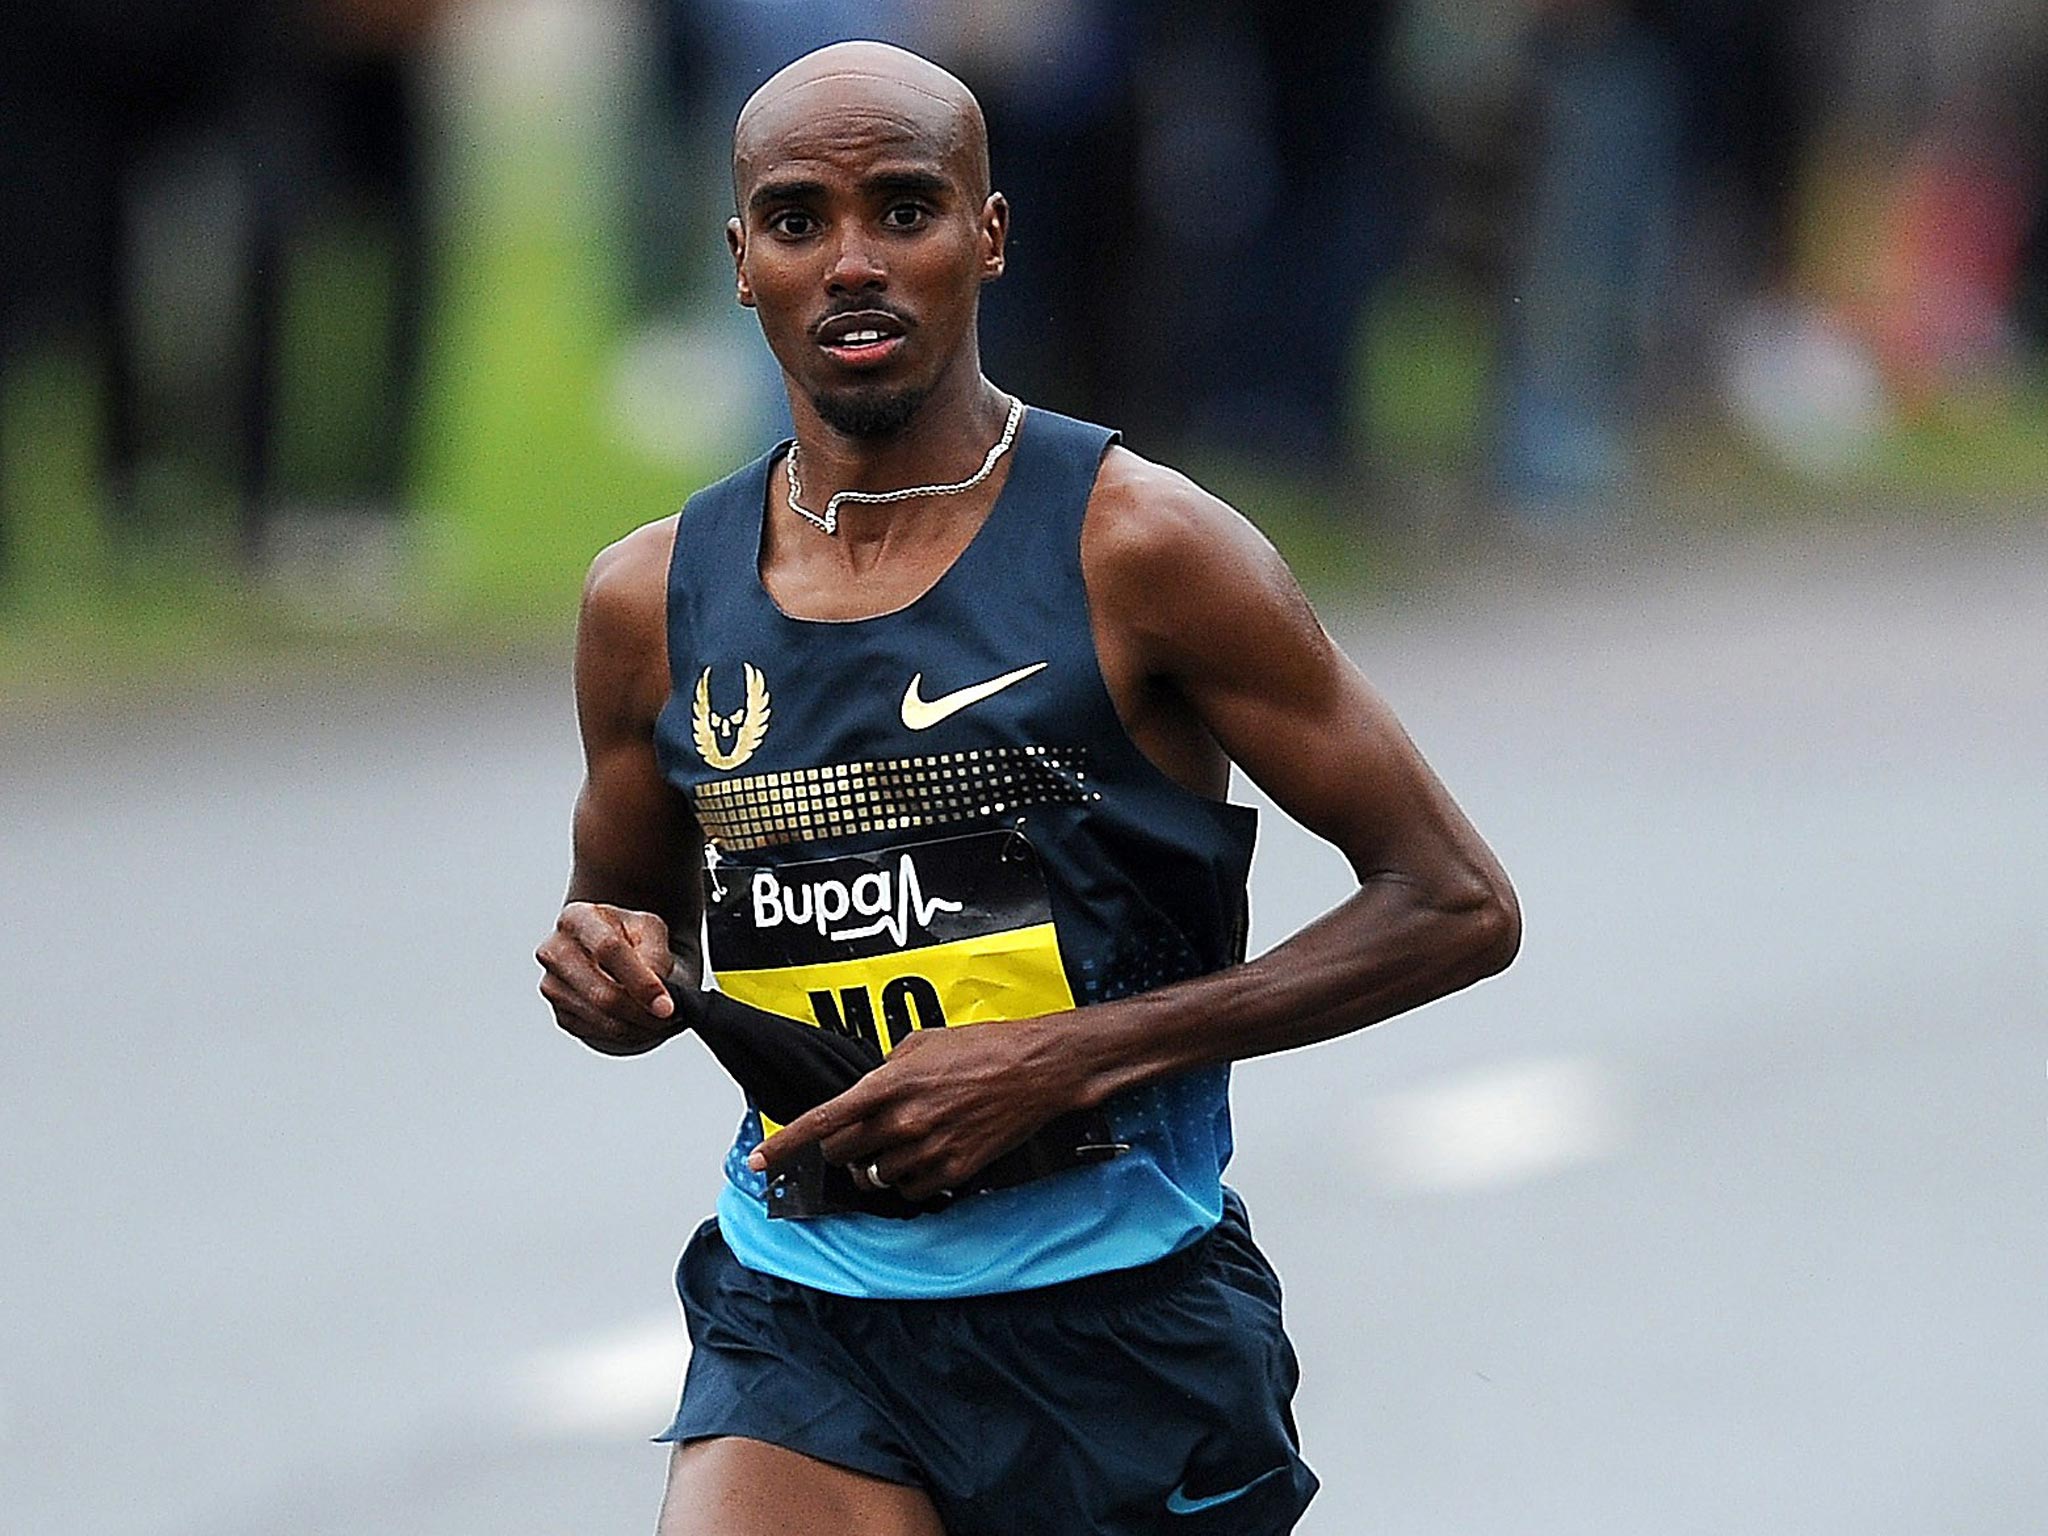 Mo Farah will be returning to action this week in the New York City Half Marathon